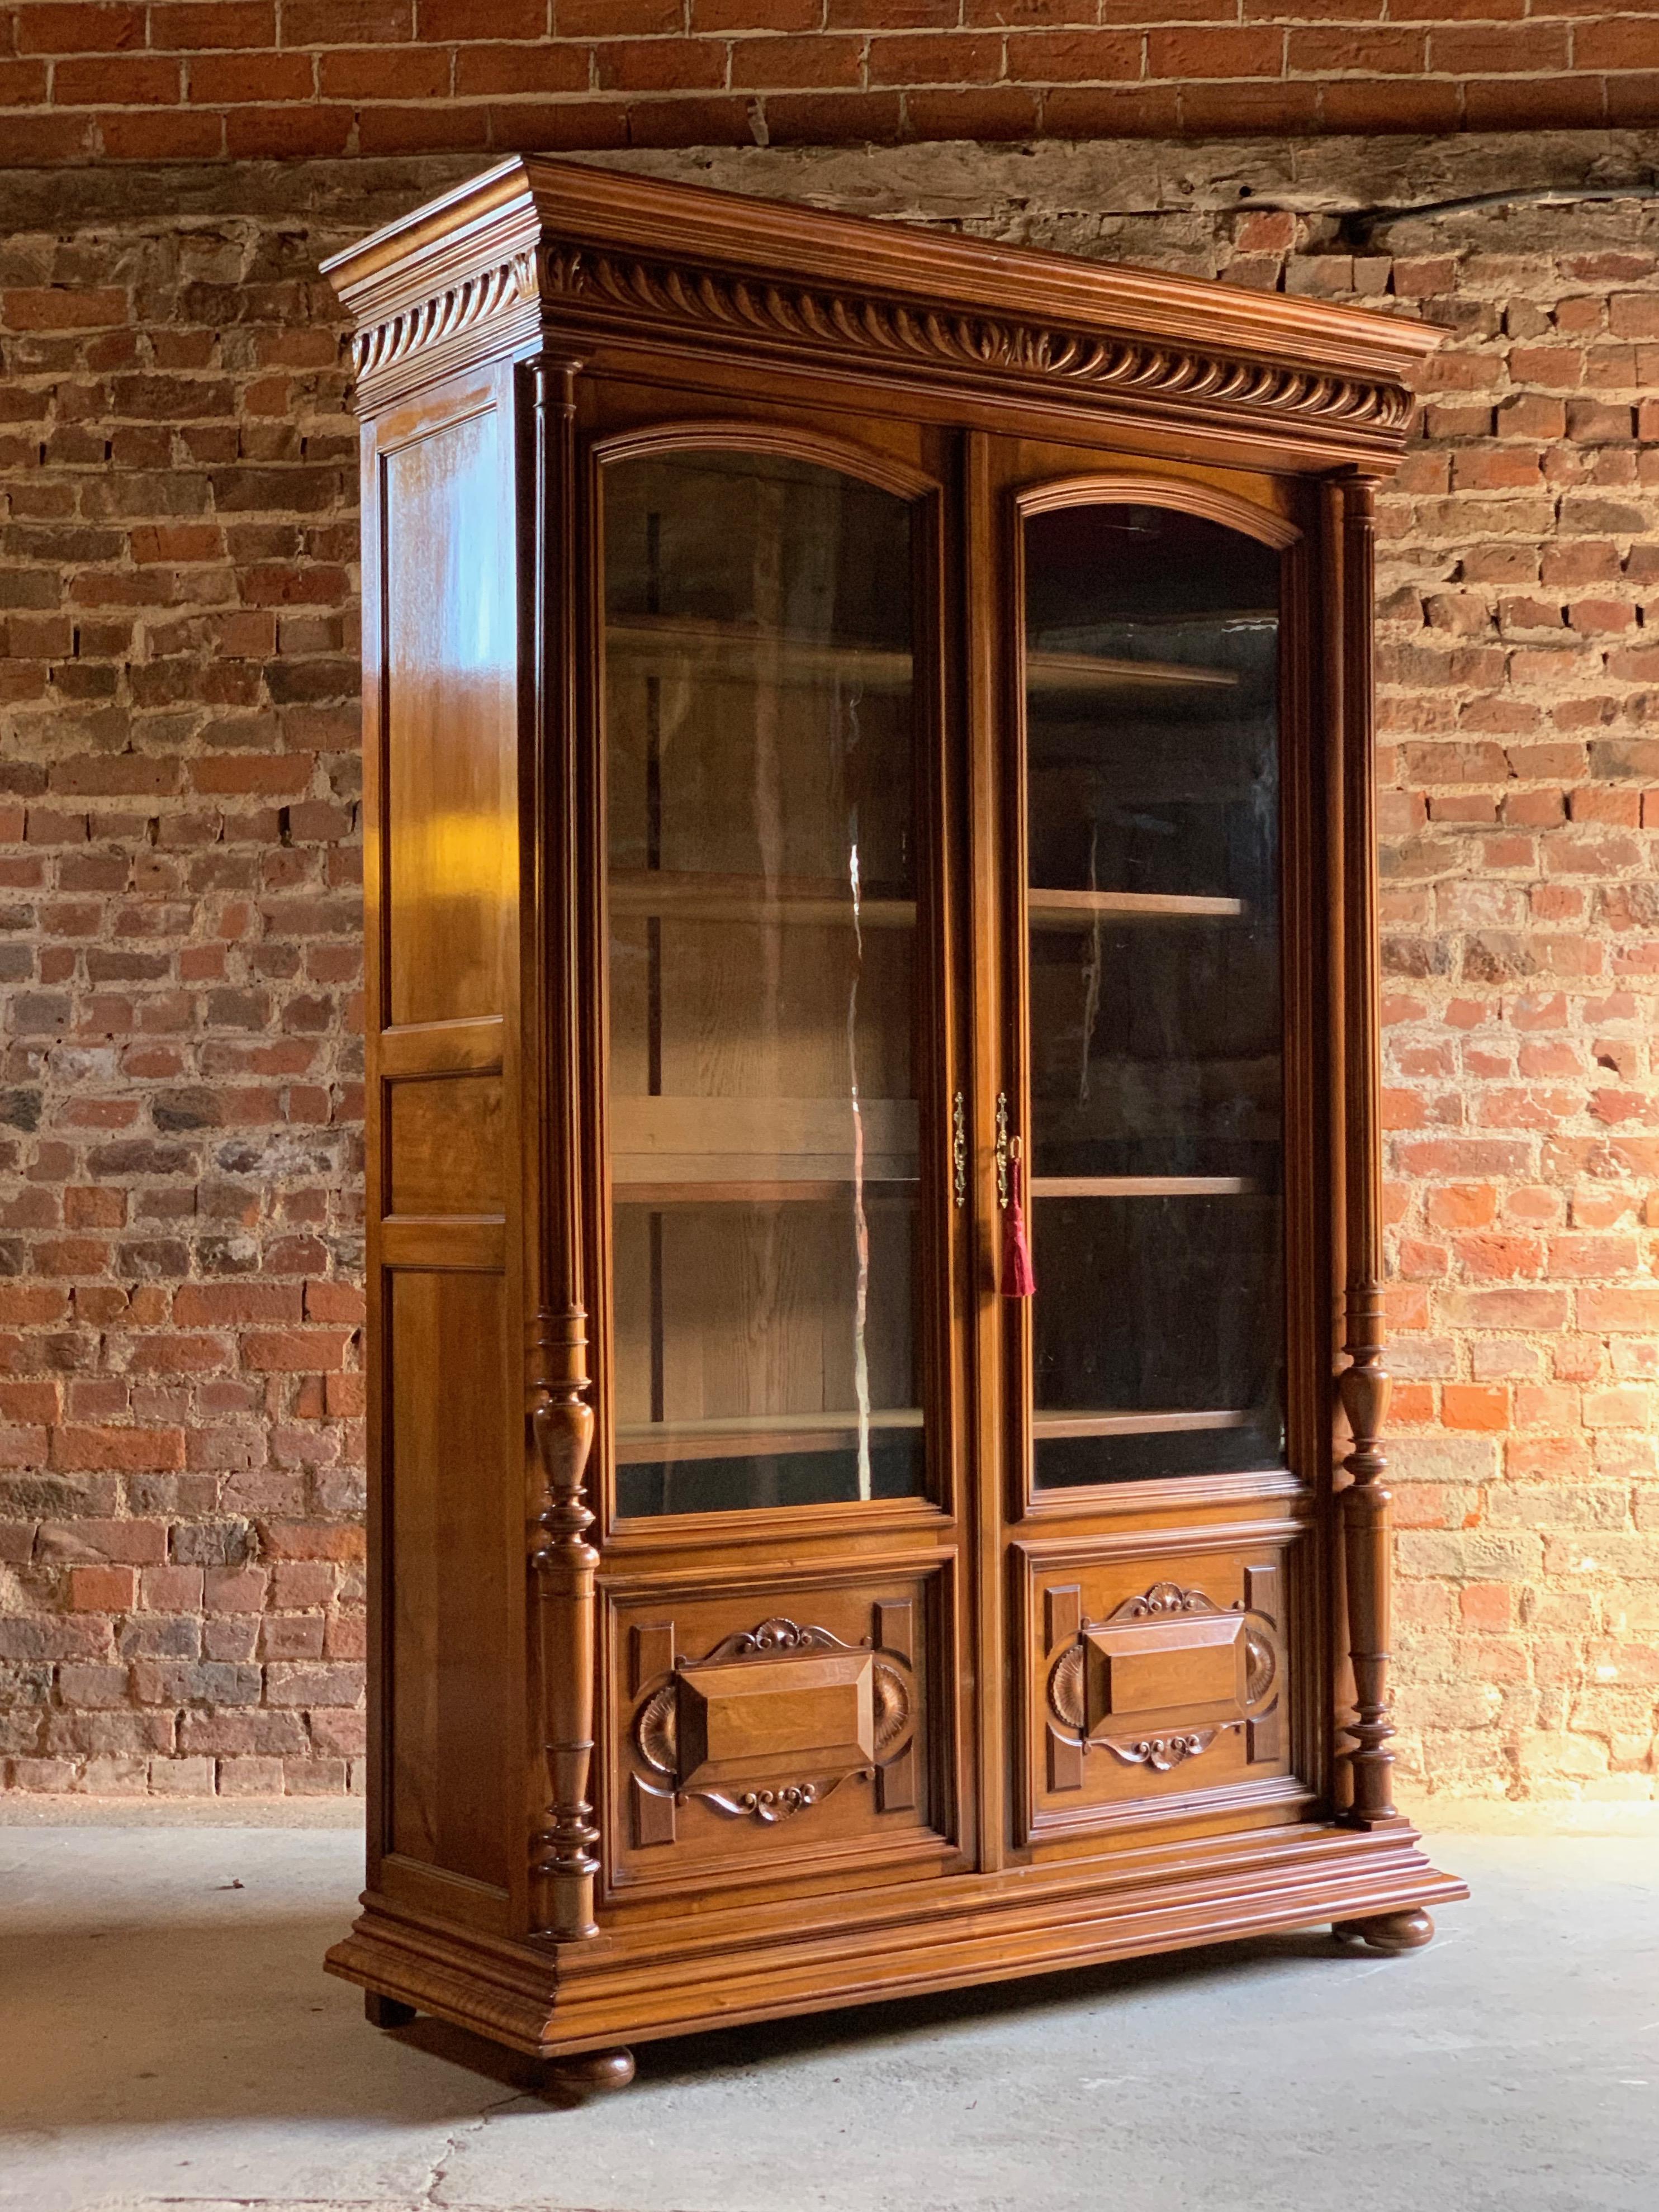 Fabulous antique 19th century French solid walnut bookcase vitrine circa 1890 Number 3

A fabulous tall and elegant 19th century French walnut two-door glazed bookcase vitrine circa 1890, the overhanging moulded carved cornice above two panelled